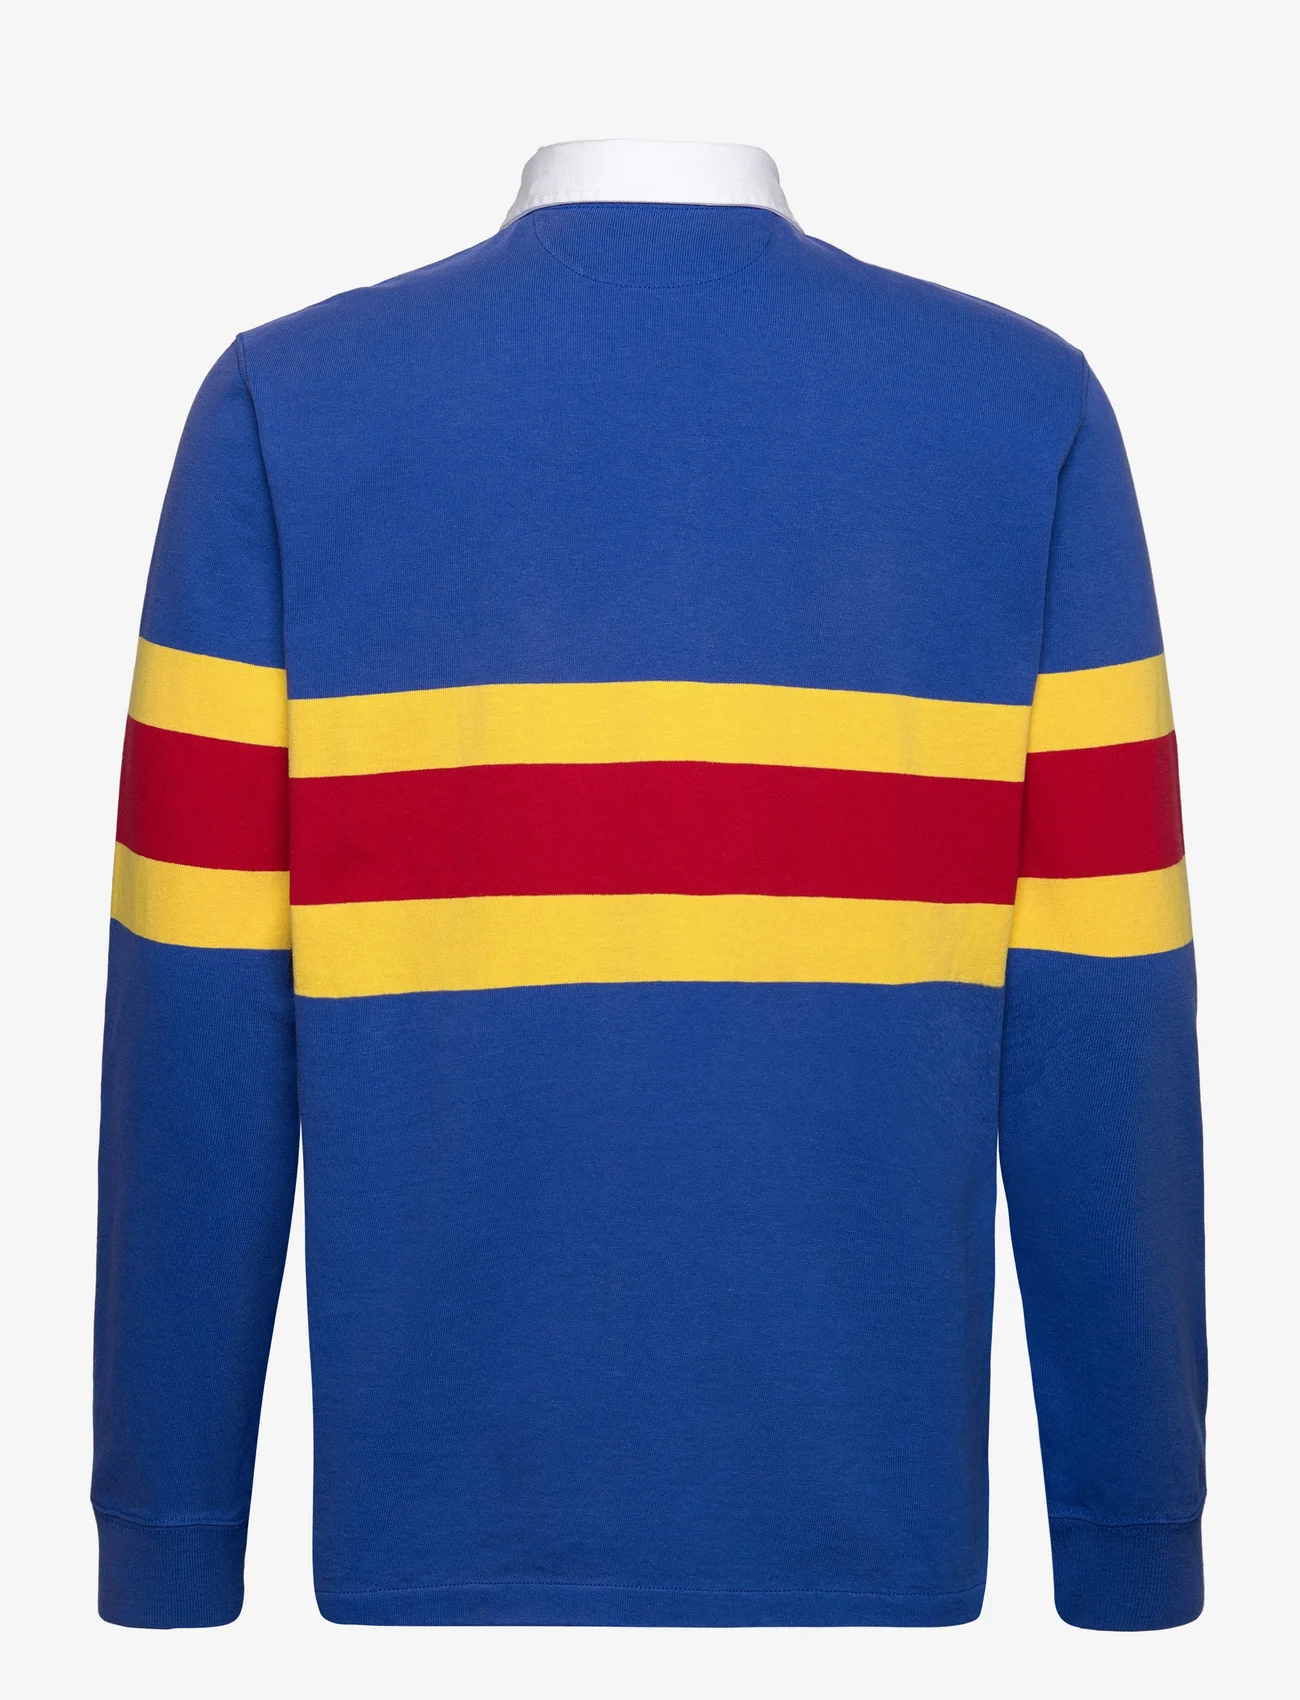 Polo Ralph Lauren Classic Fit Striped Jersey Rugby Shirt - Boozt.com